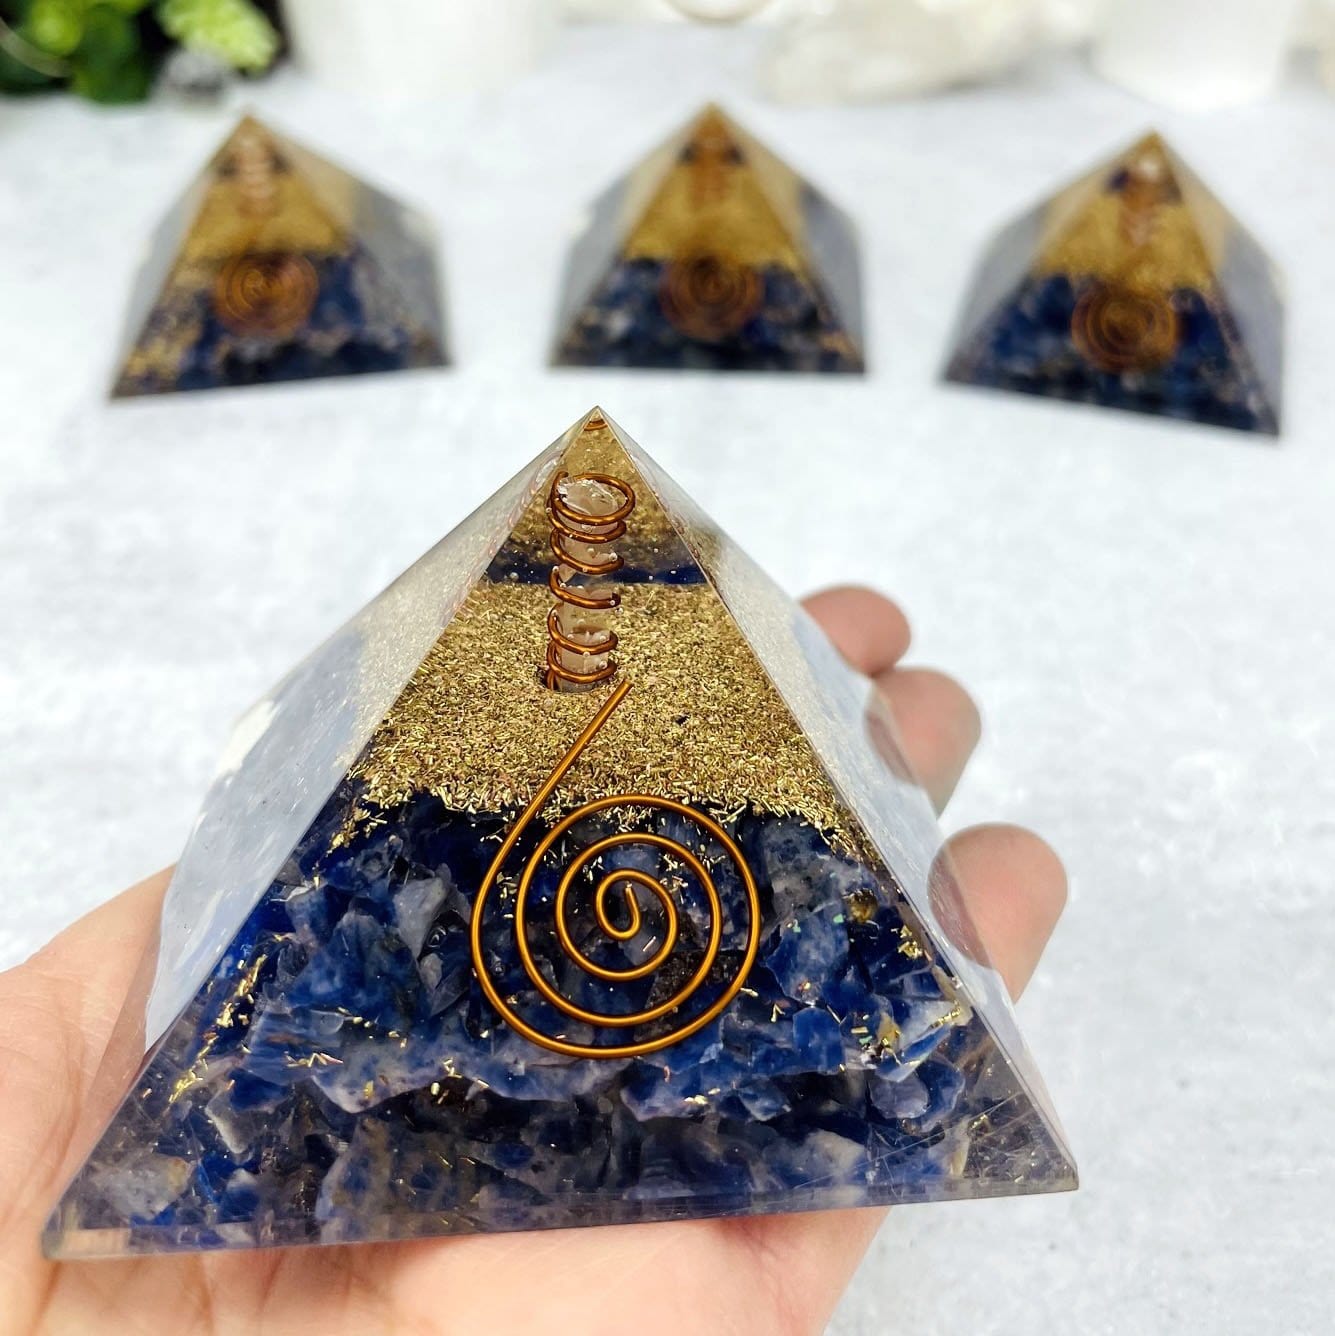 4 Orgone Sodalite with Crystal Point Pyramid displayed, 3 out of focus and 1 in focus, held in hand.